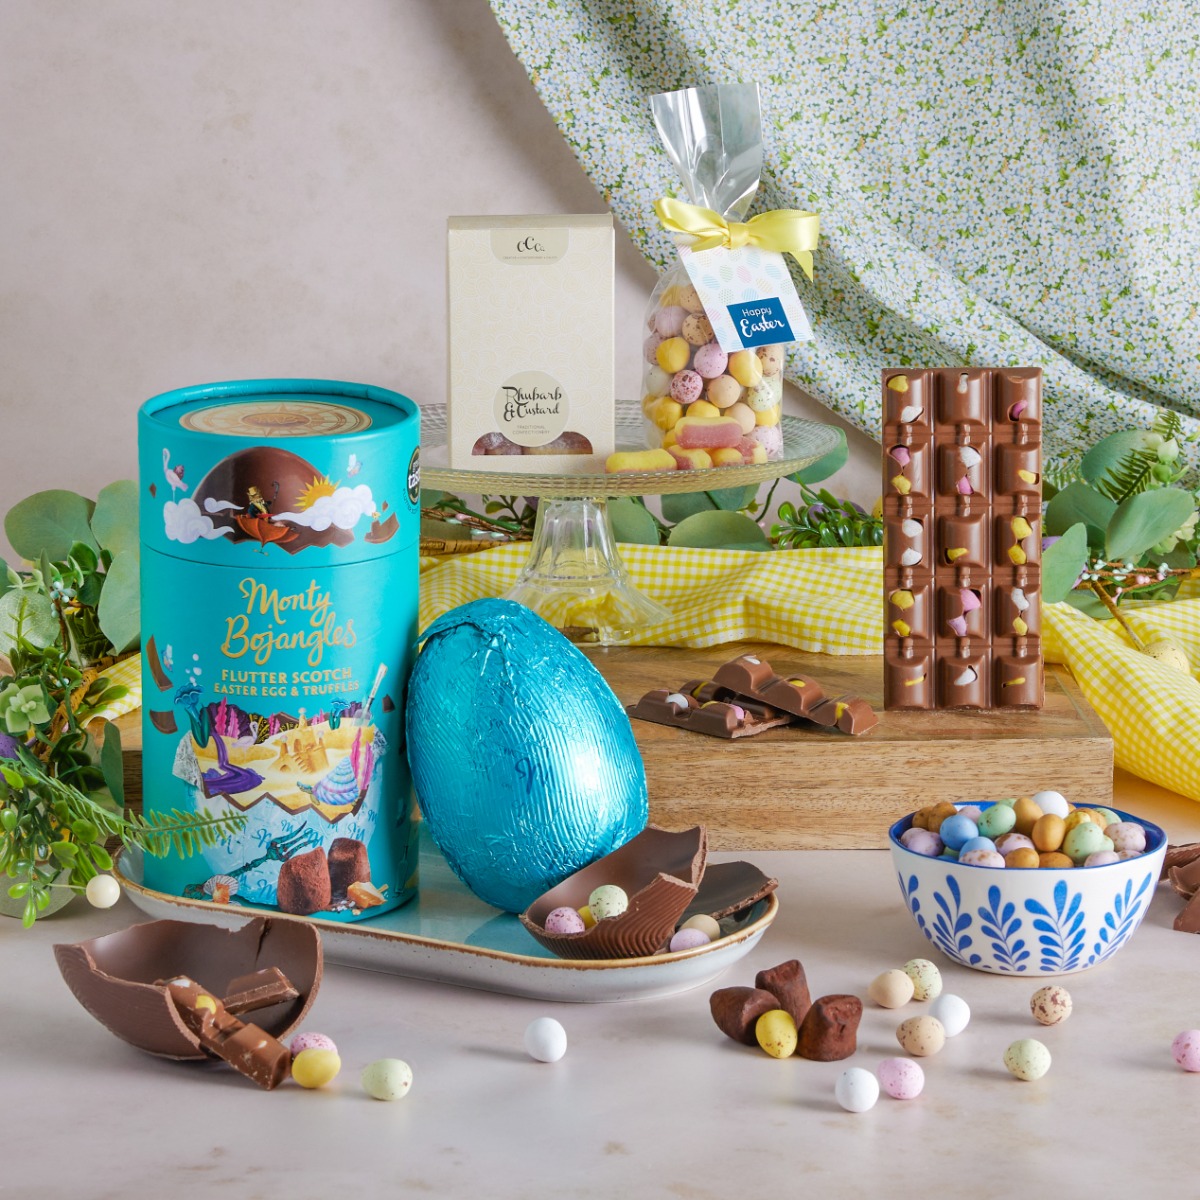 The Easter Egg Gift Box with contents on display